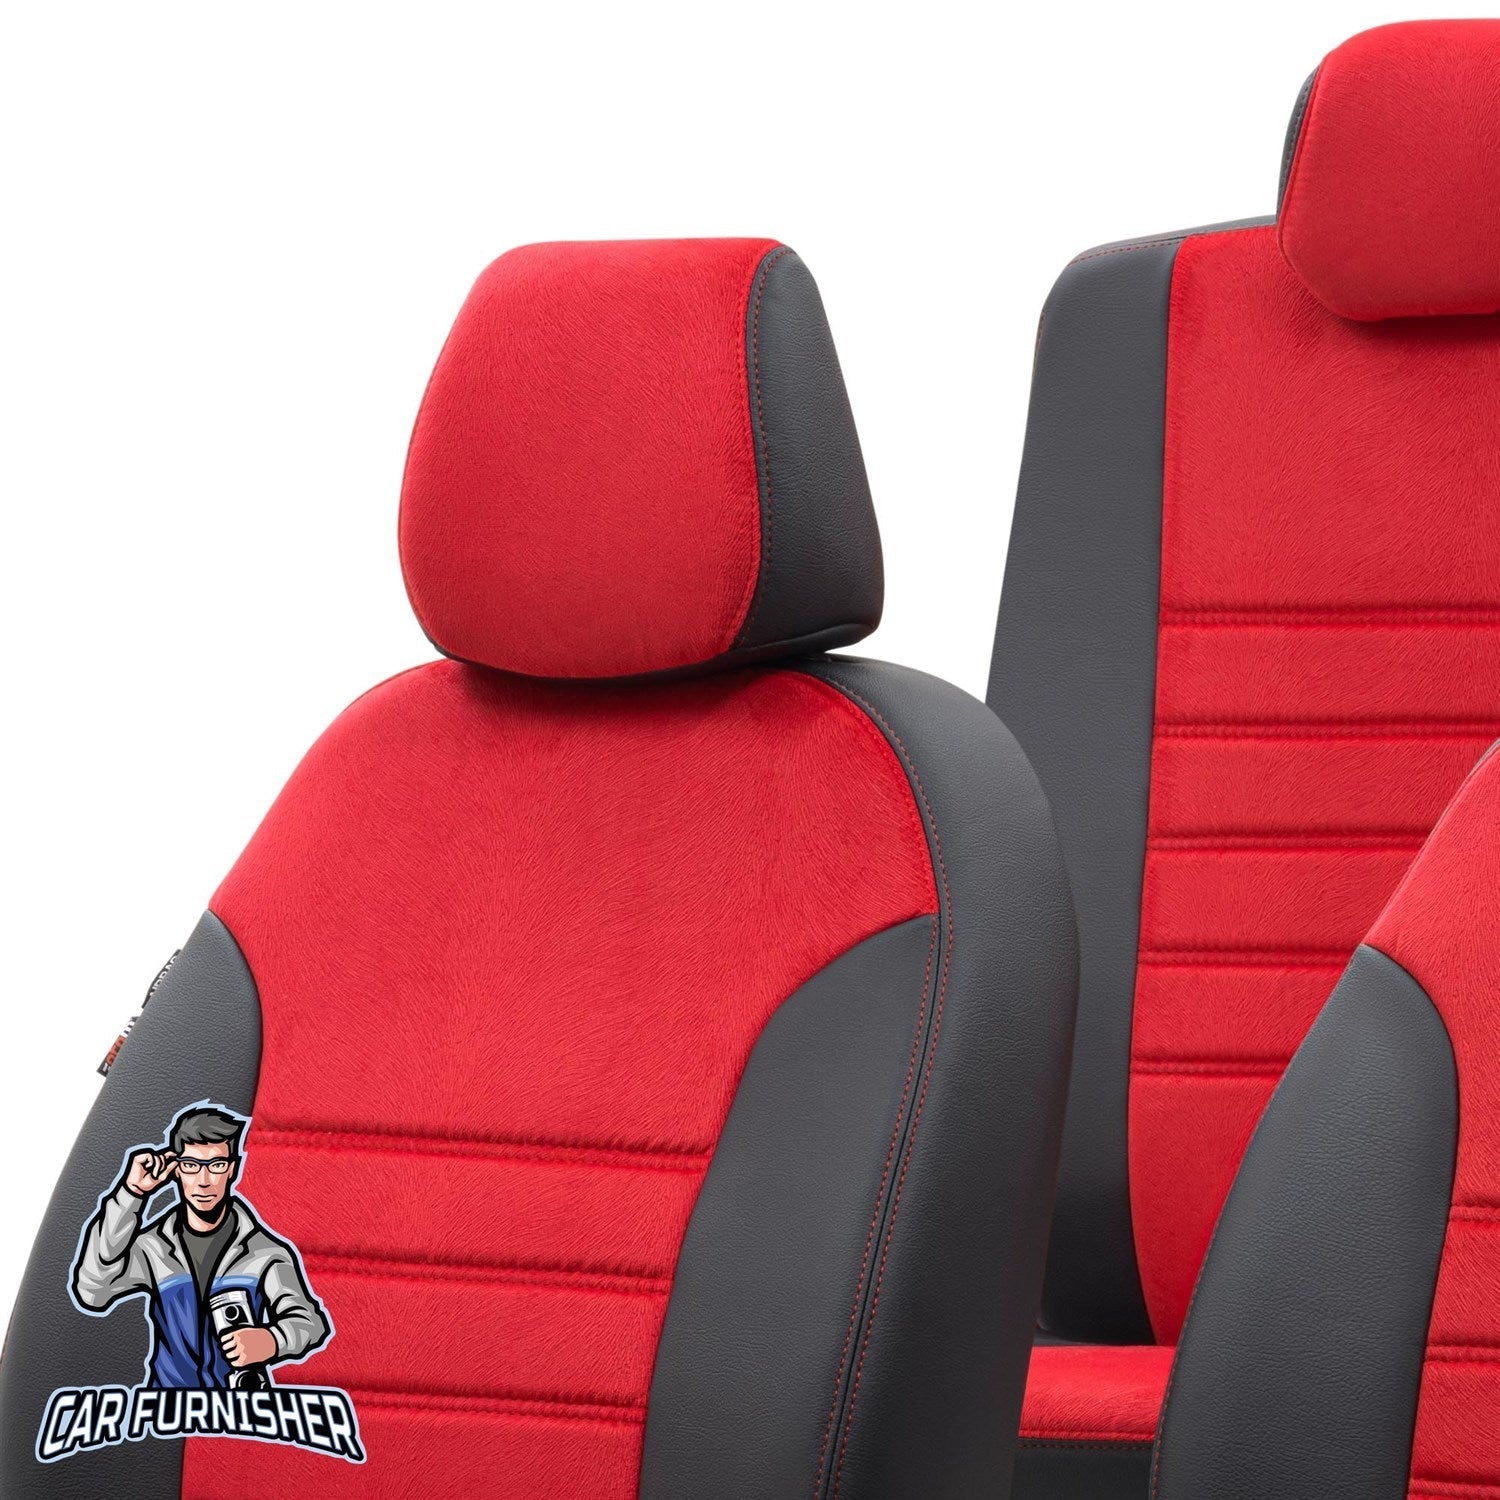 Renault Broadway Car Seat Covers 1983-2001 London Design Red Full Set (5 Seats + Handrest) Leather & Fabric